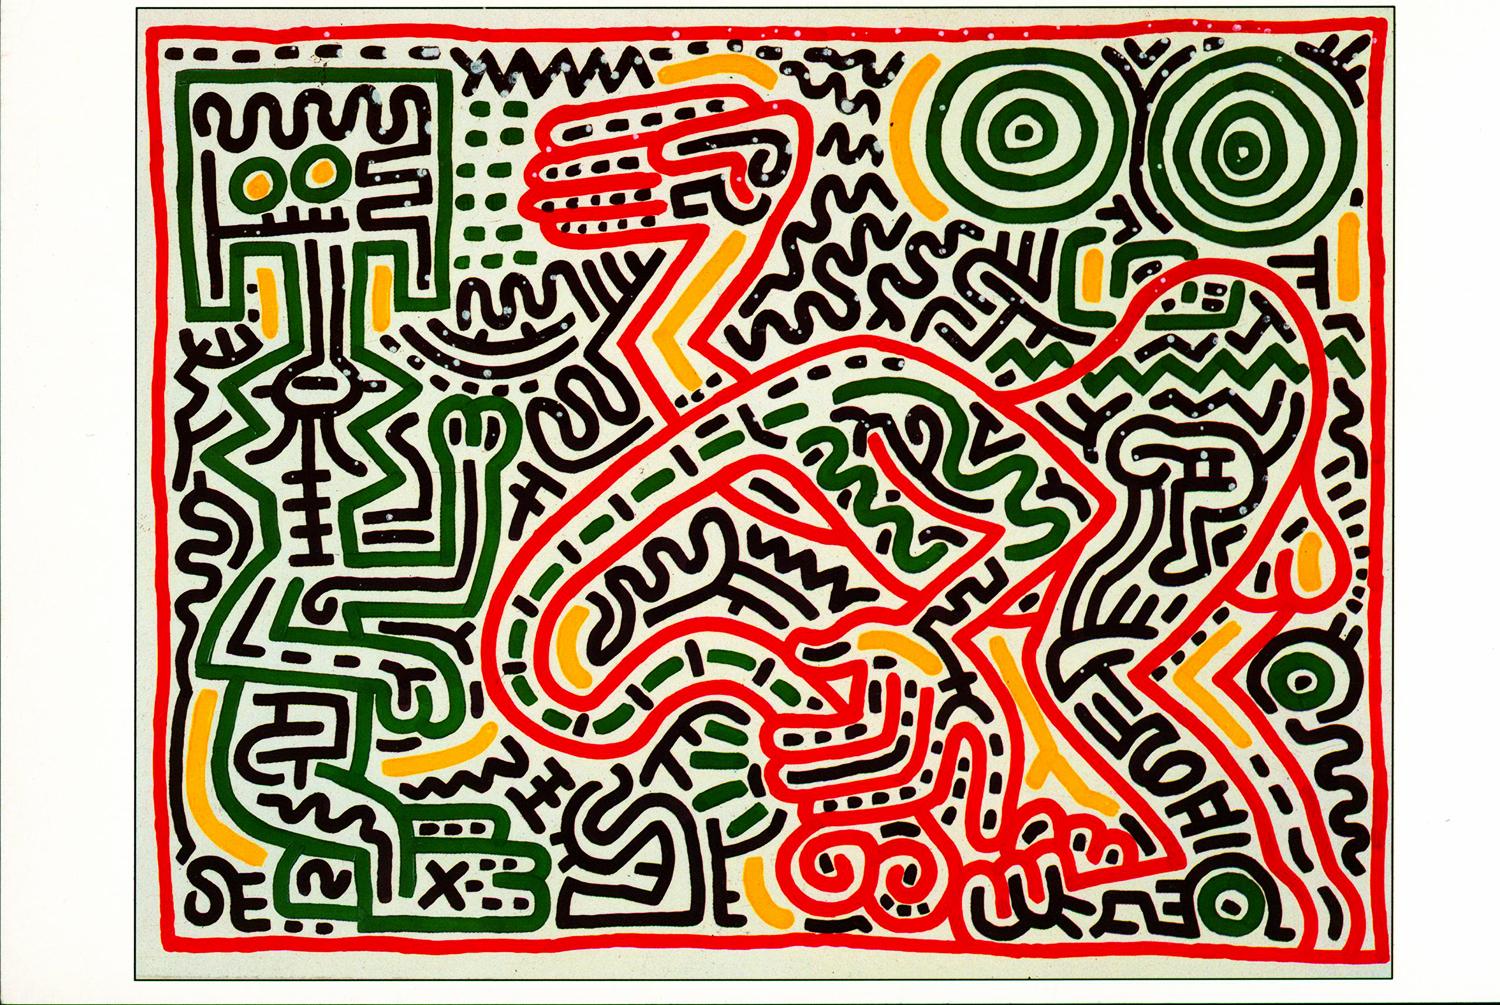 Keith Haring Tony Shafrazi announcement 1980s (Keith Haring season's greetings) - Print by (after) Keith Haring